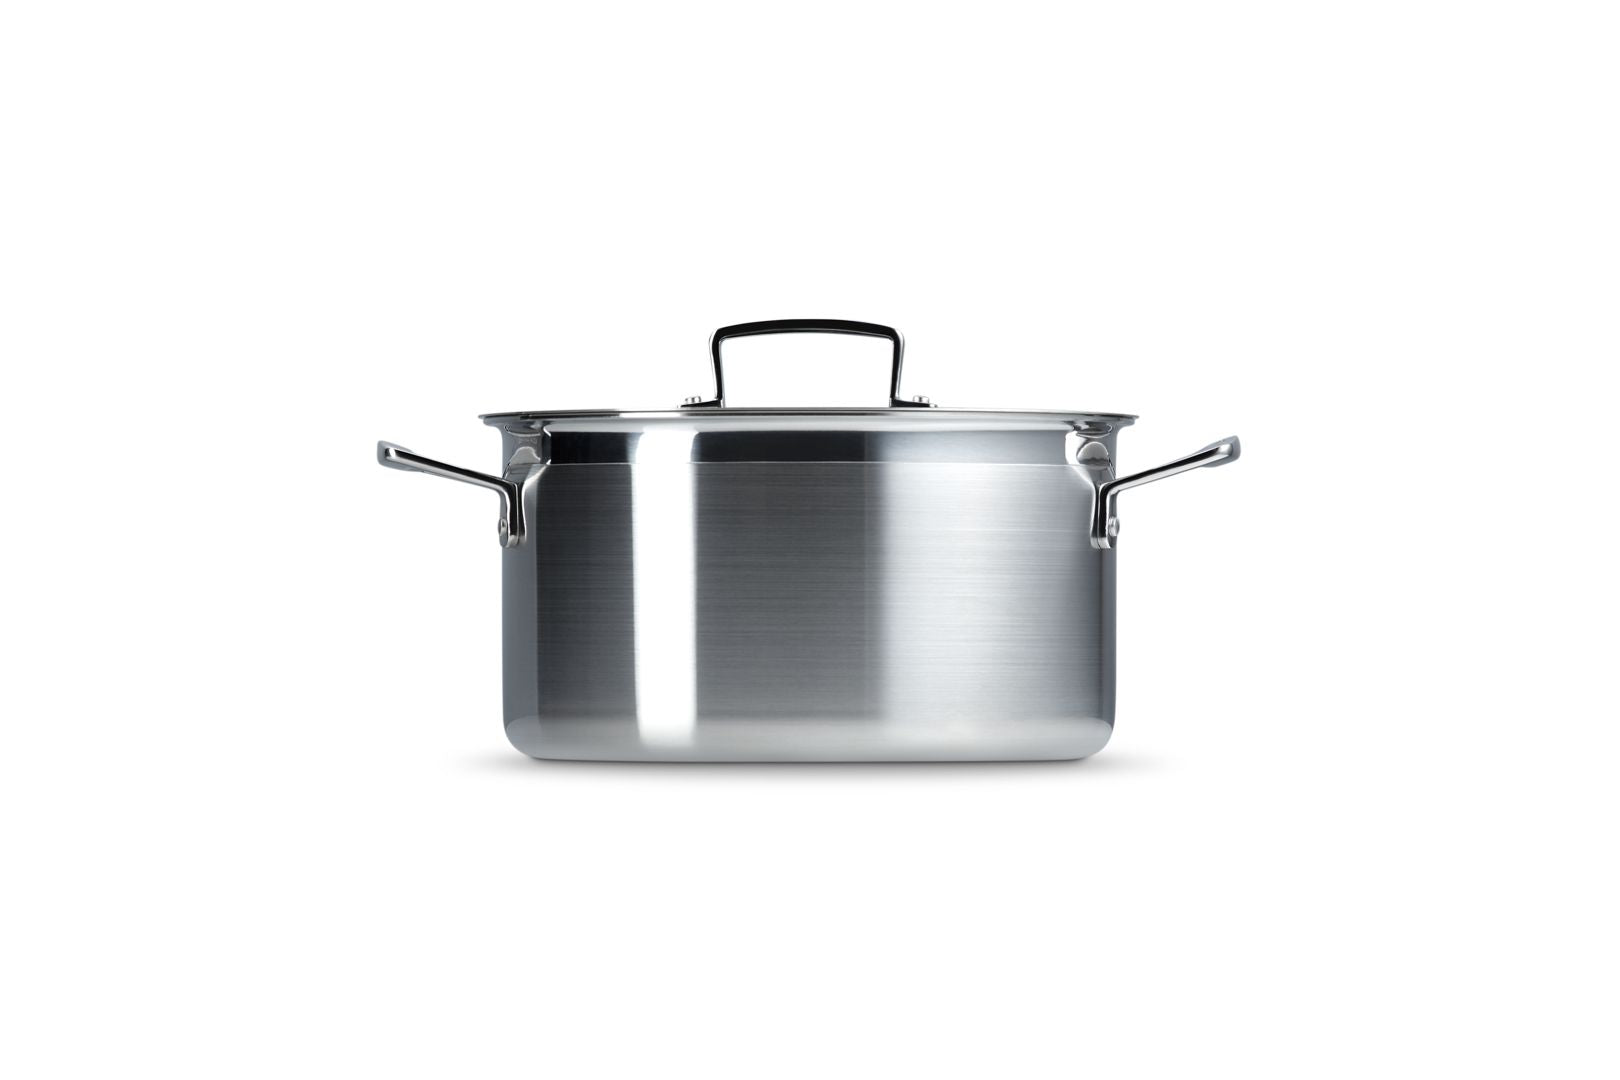 Le Creuset 3 Piece Cookware Set, Stainless Steel